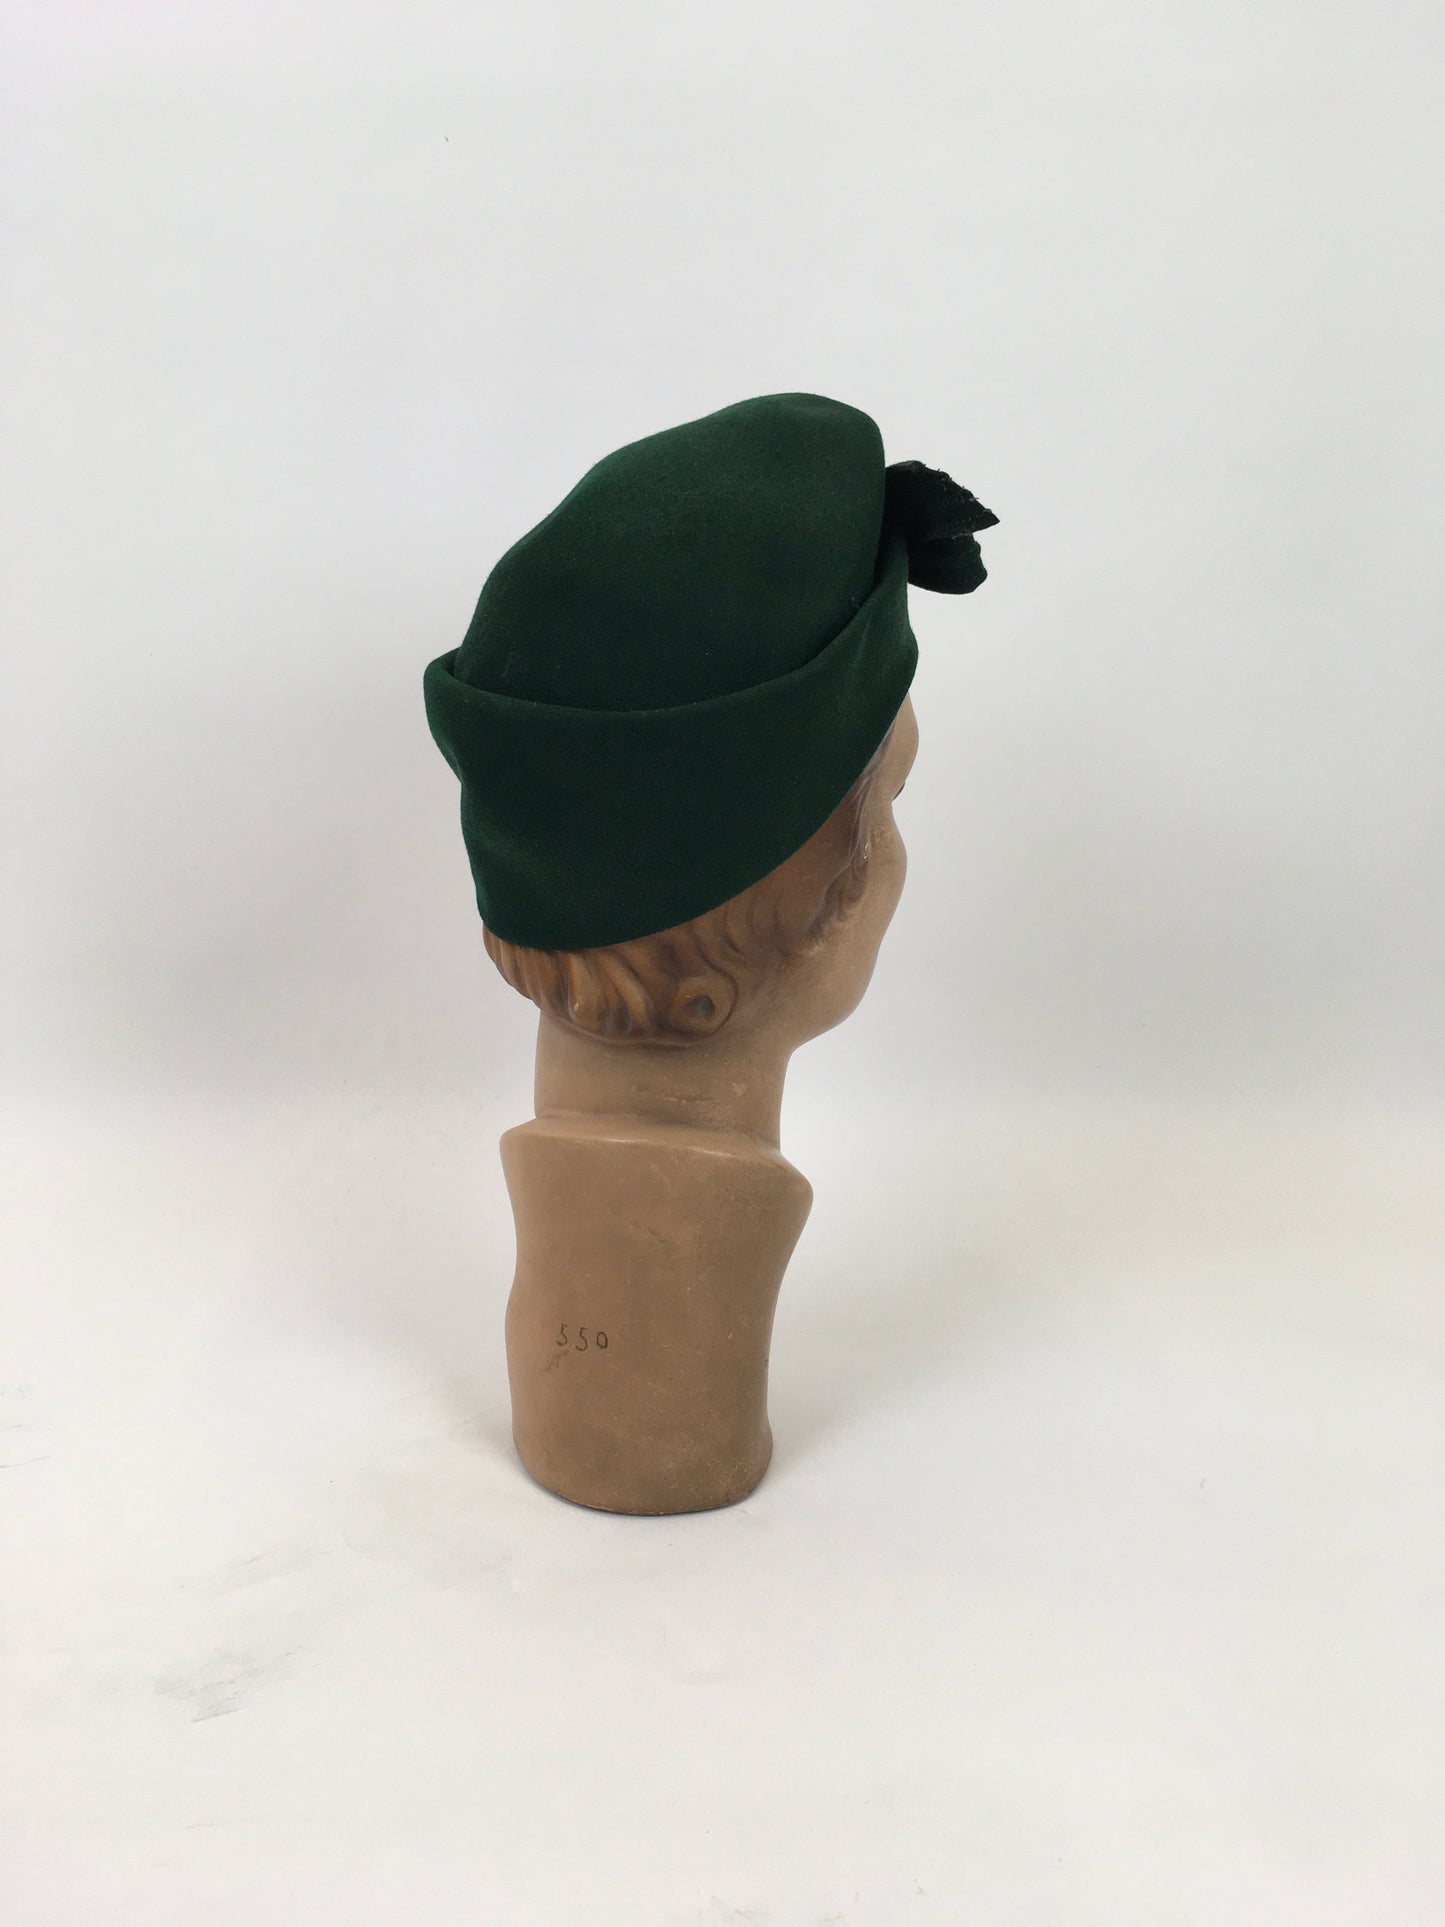 Original 1940's Stunning Hat - In A Bottle Green with Bow Accent